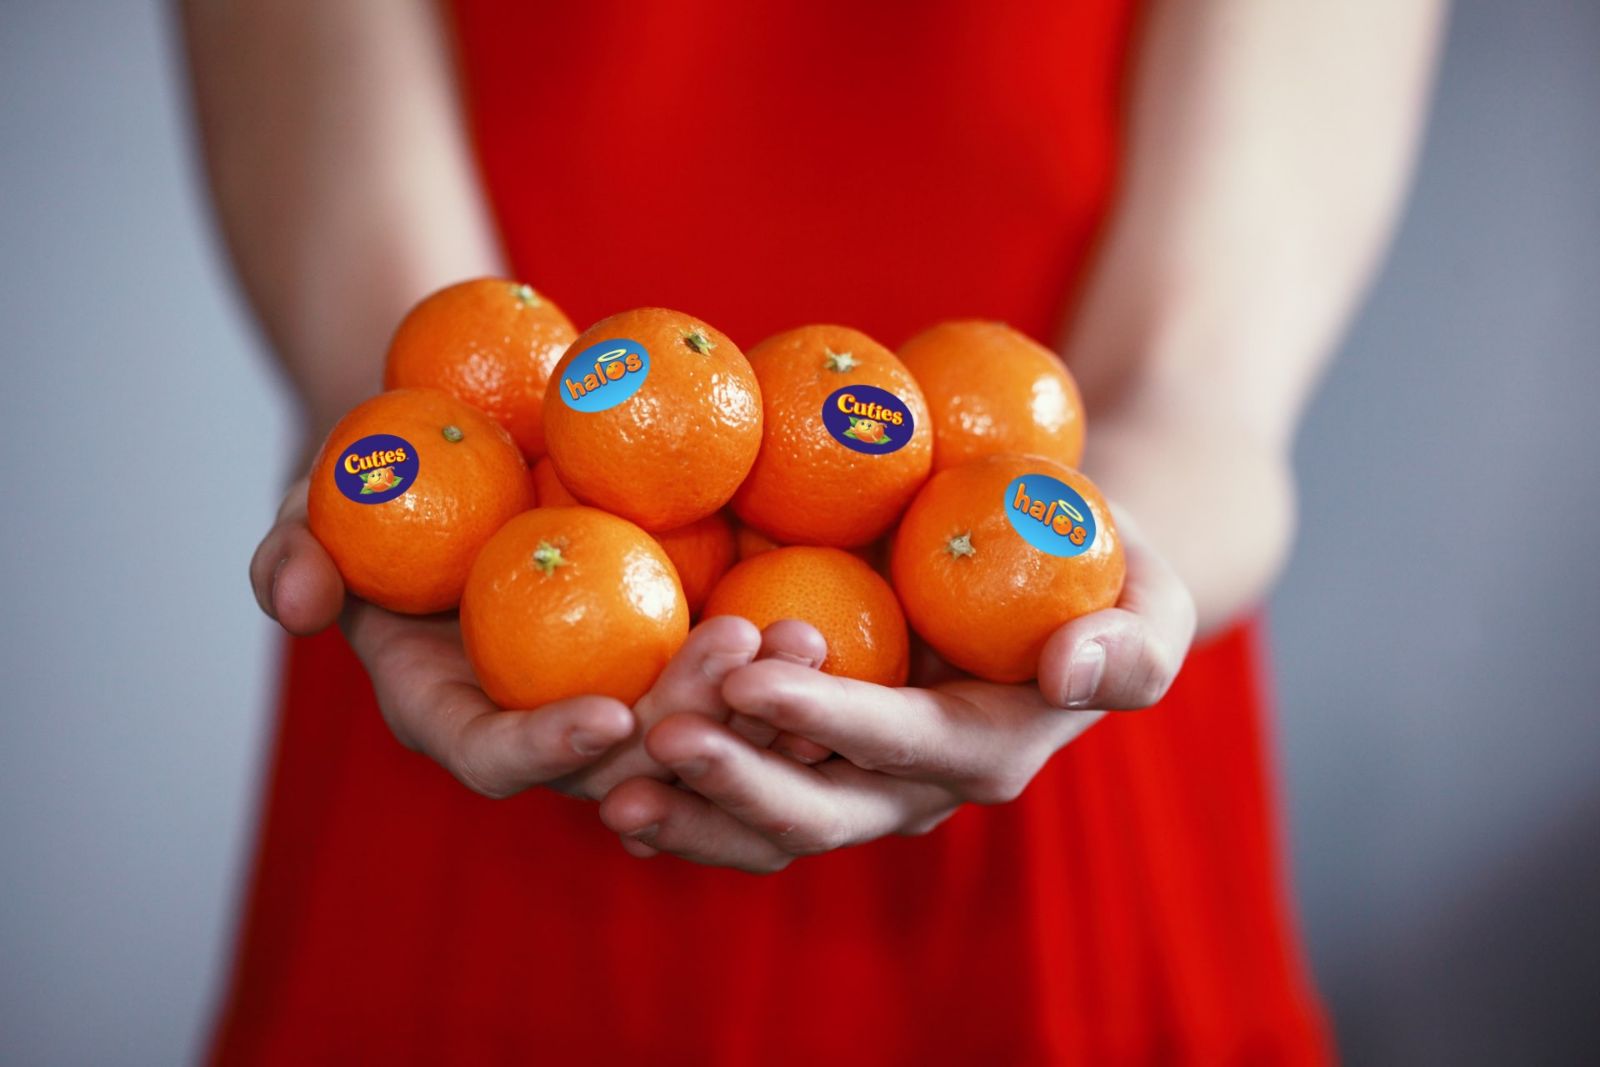 What's the Difference Between Cuties, Halos, and Delite Mandarins?